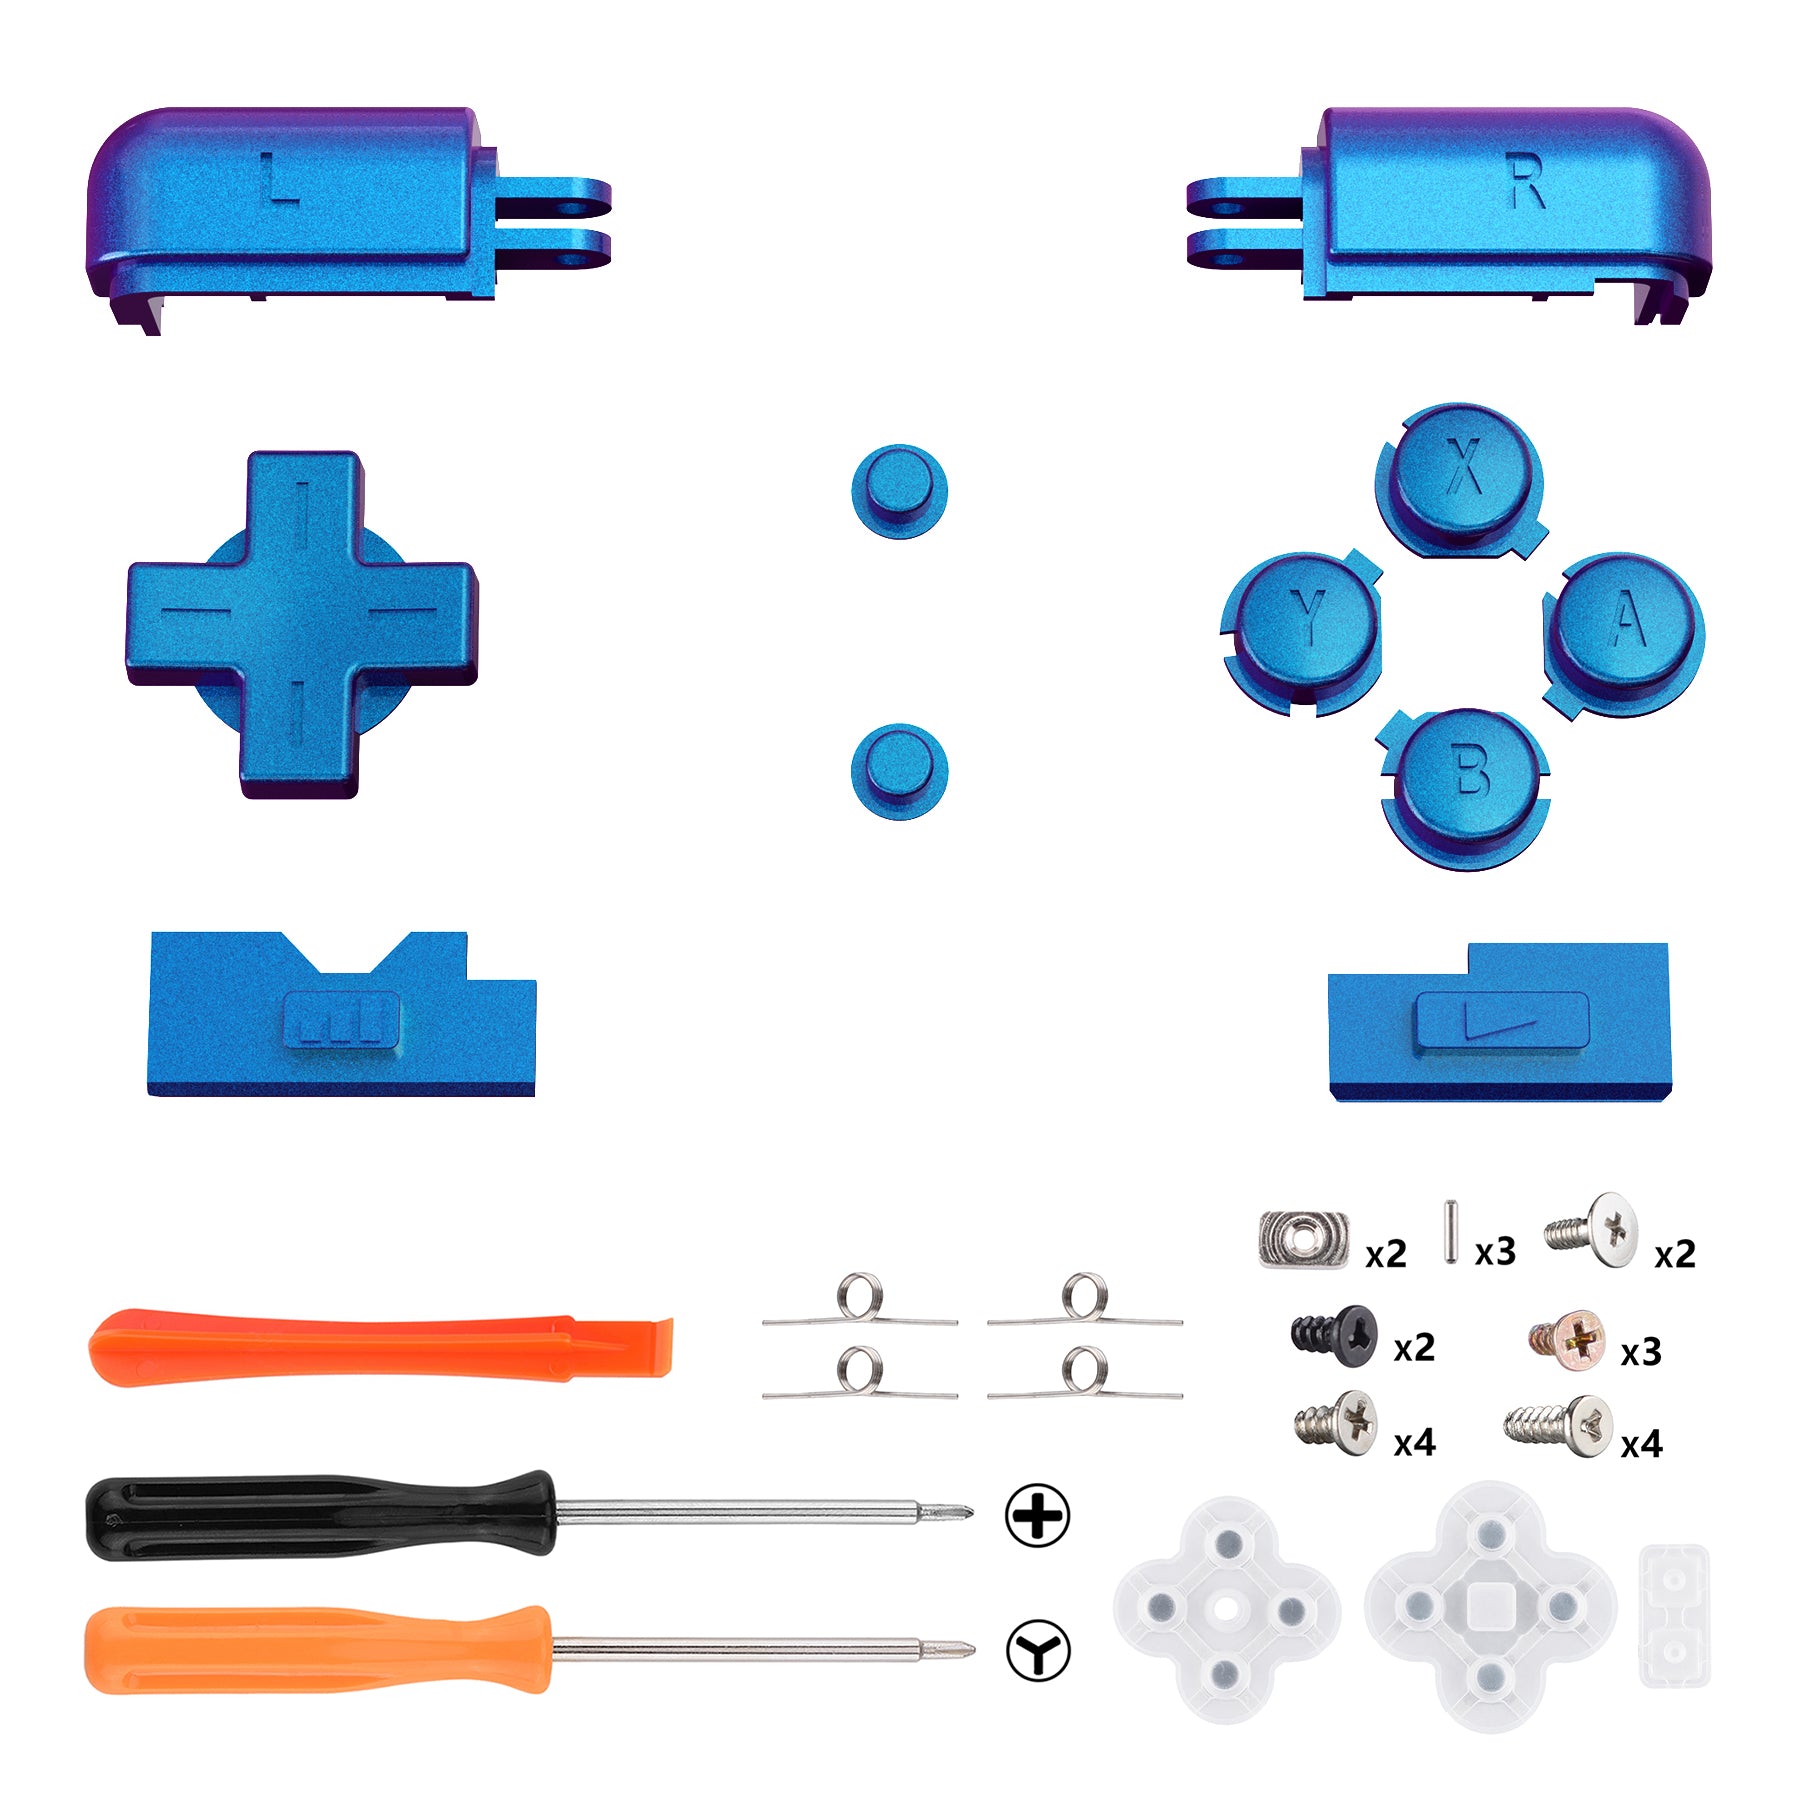 eXtremeRate Replacement Full Set Buttons for Nintendo DS Lite NDSL - Chameleon Purple Blue eXtremeRate